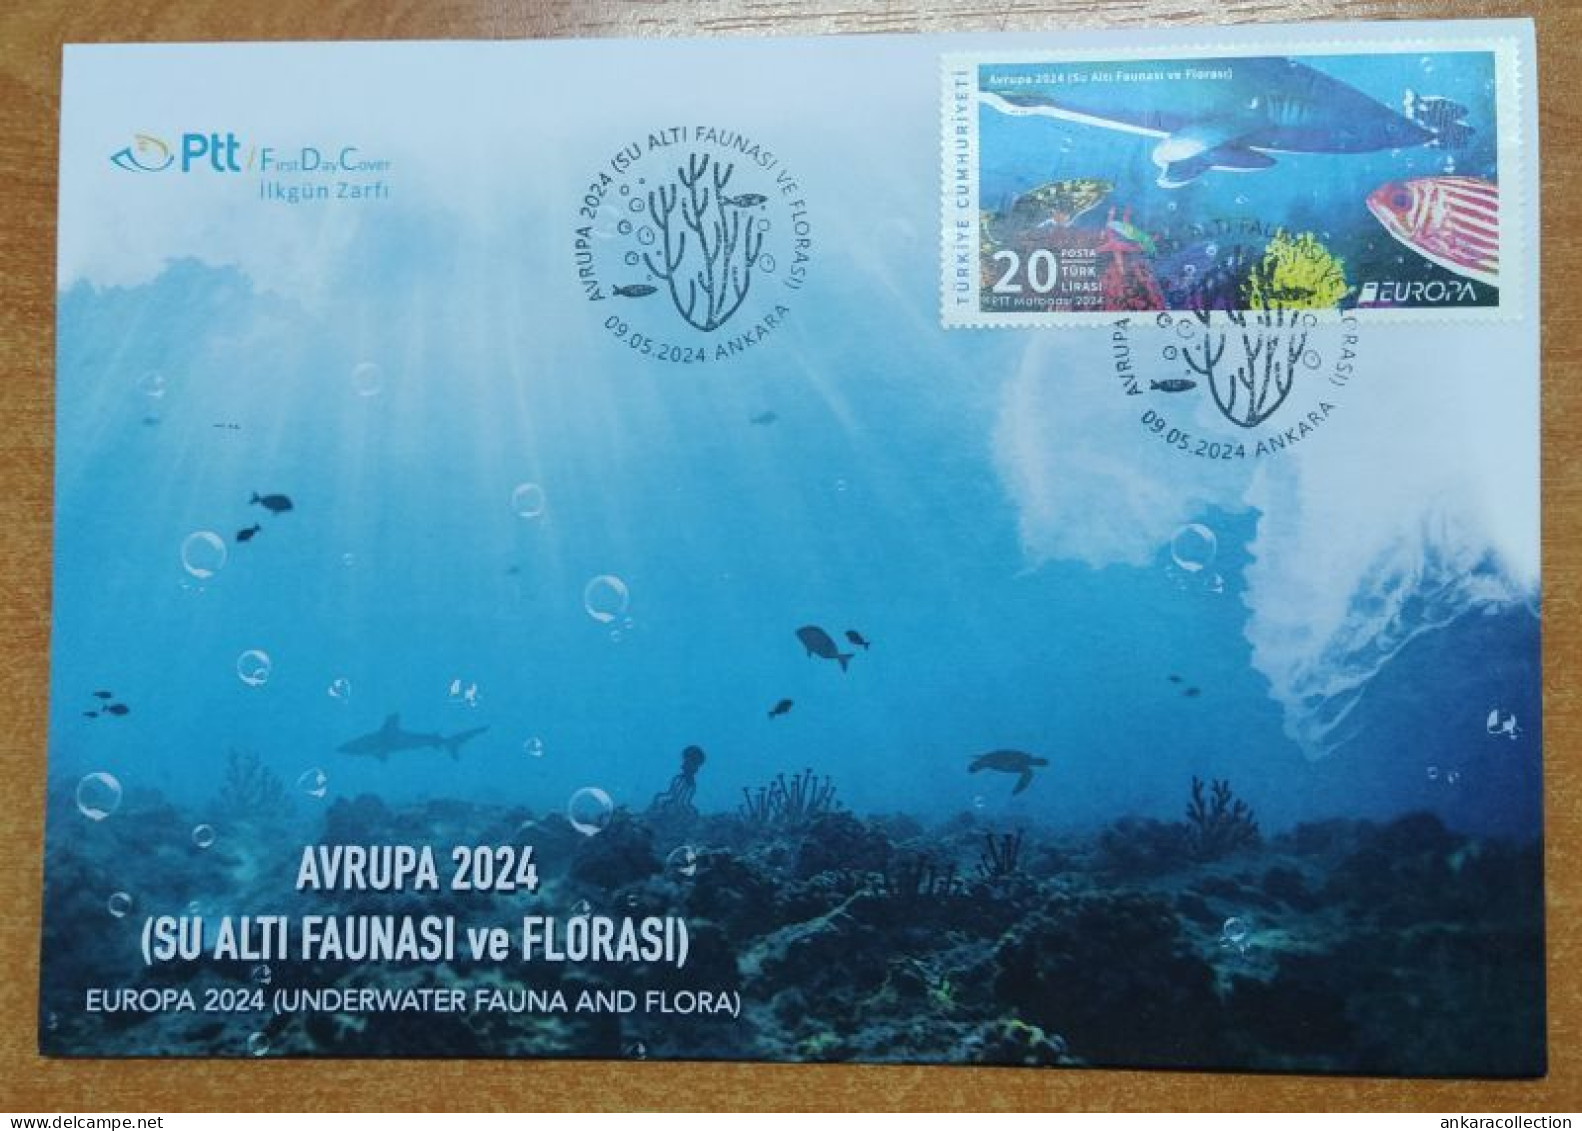 AC - TURKEY FDC -  EUROPA 2024  UNDERWATER FAUNA AND FLORA  09 MAY 2024 - FDC